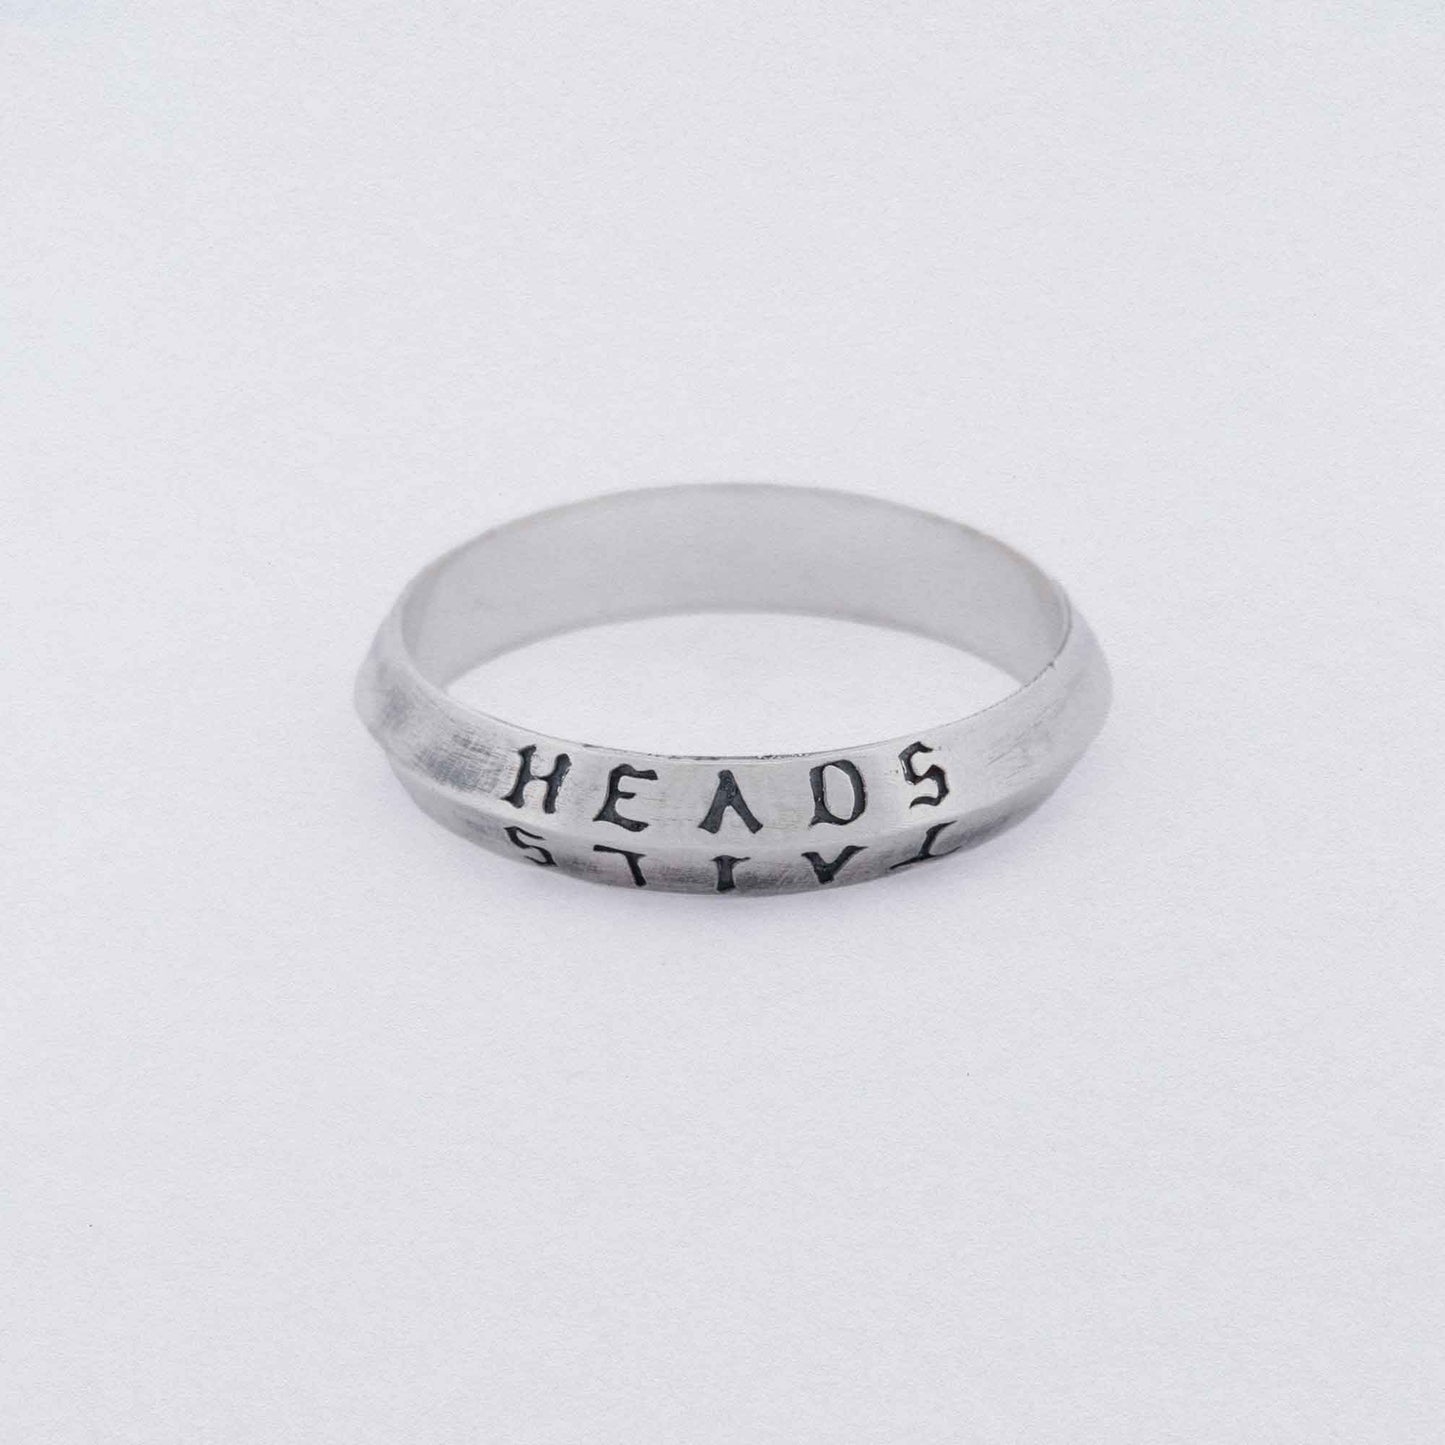 heads + tails engraved on a 925 silver band ring